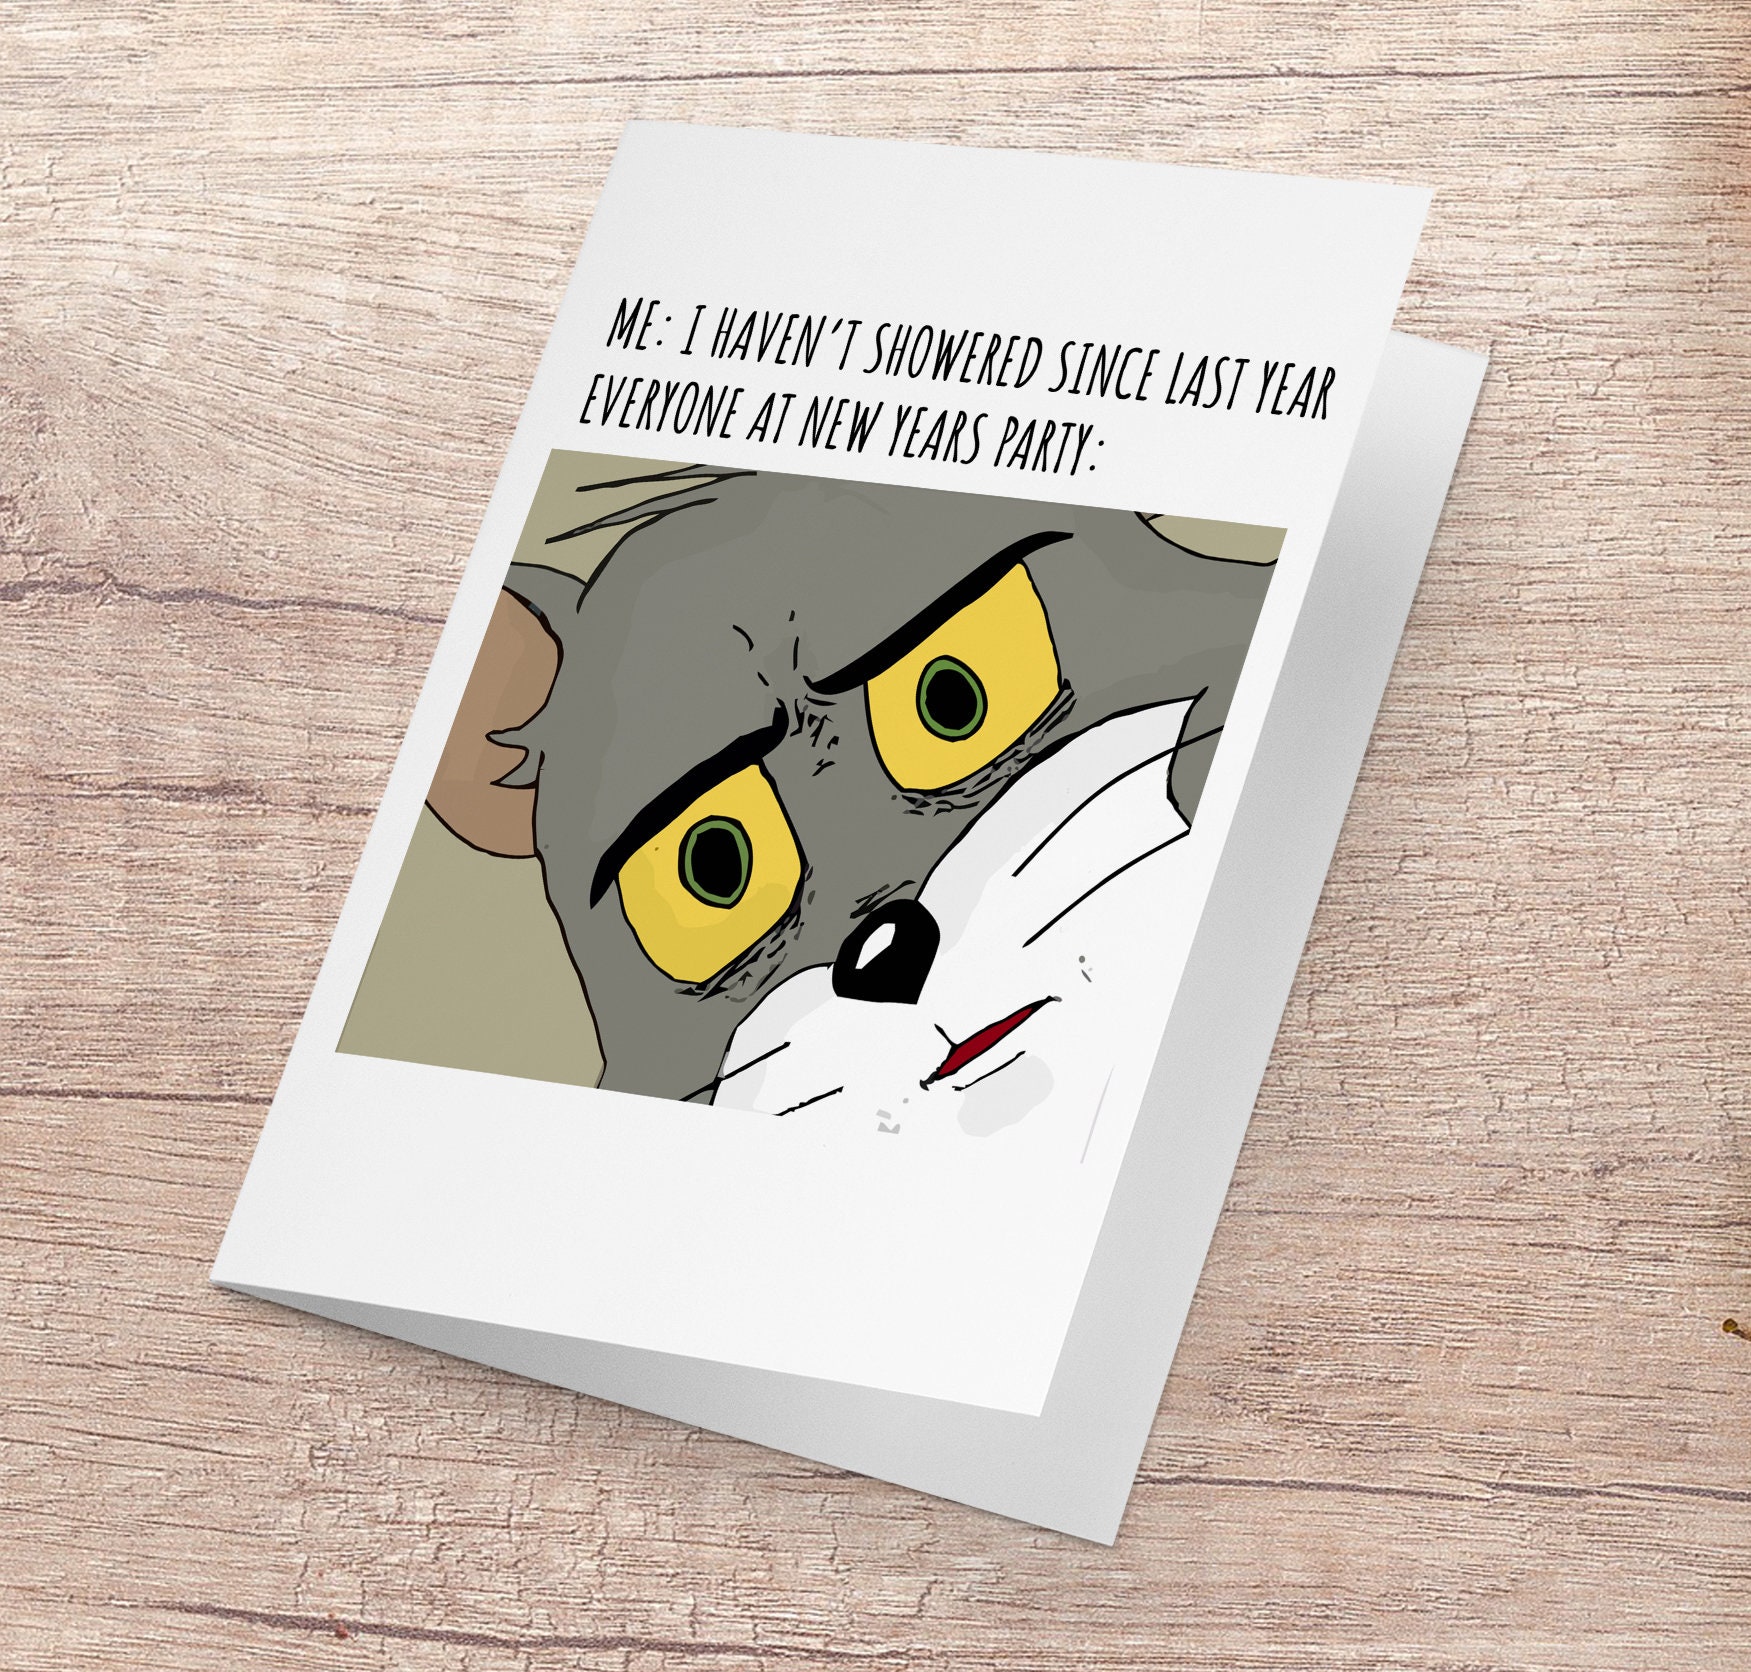 Disturbed Tom New Years Meme, Tom and Jerry, Everyone else, Funny Card,  Happy Holidays, Internet Meme